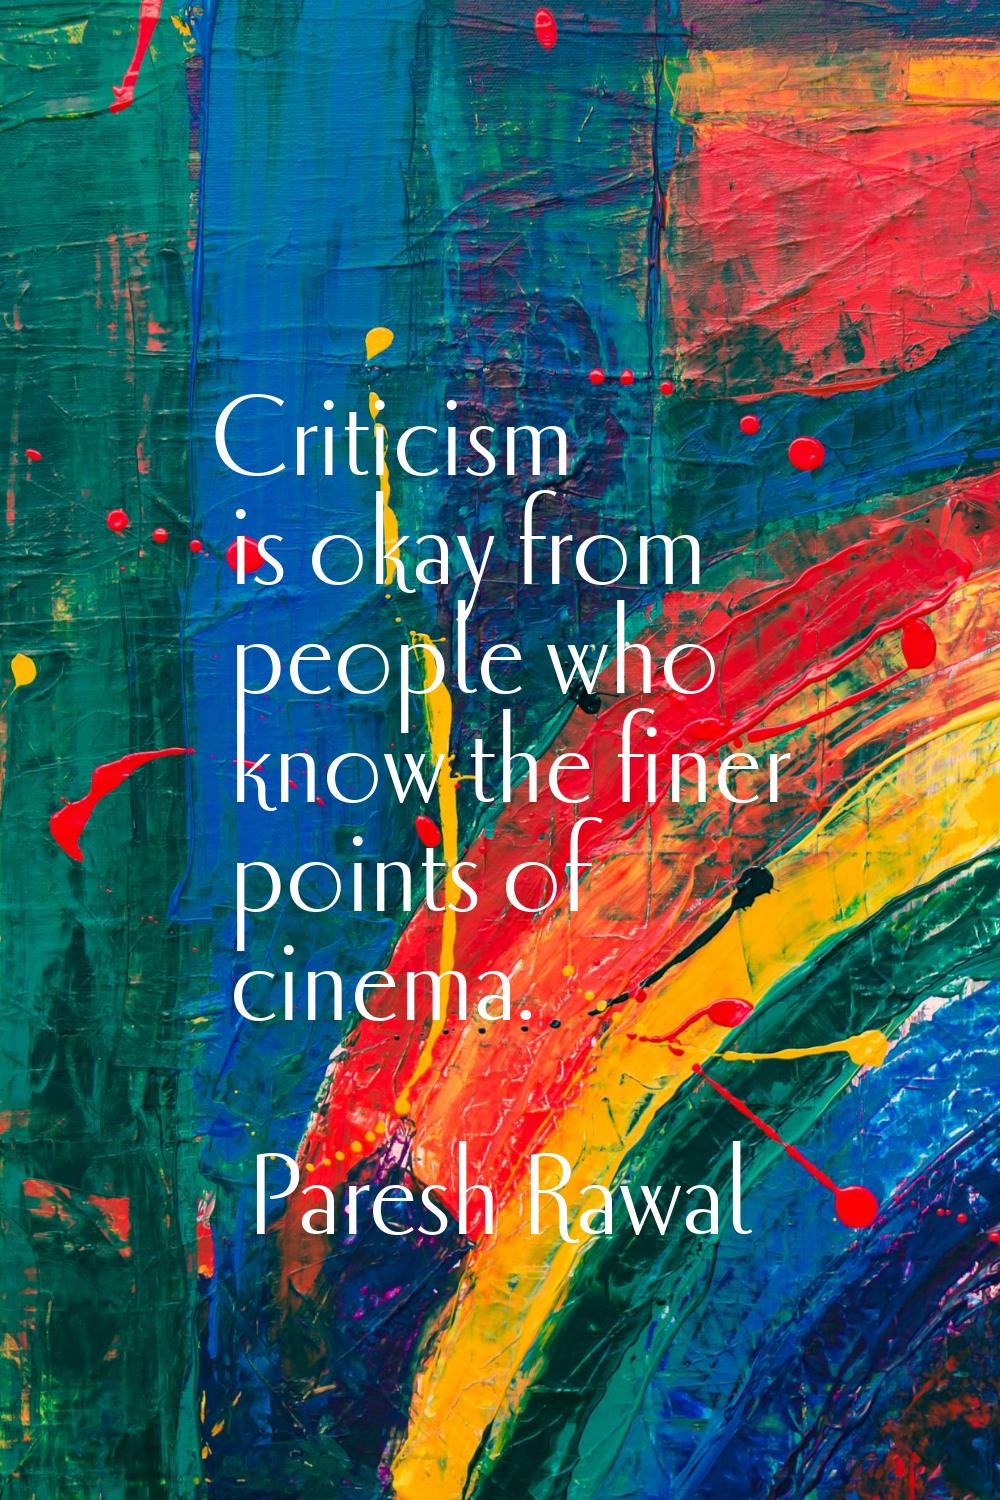 Criticism is okay from people who know the finer points of cinema.